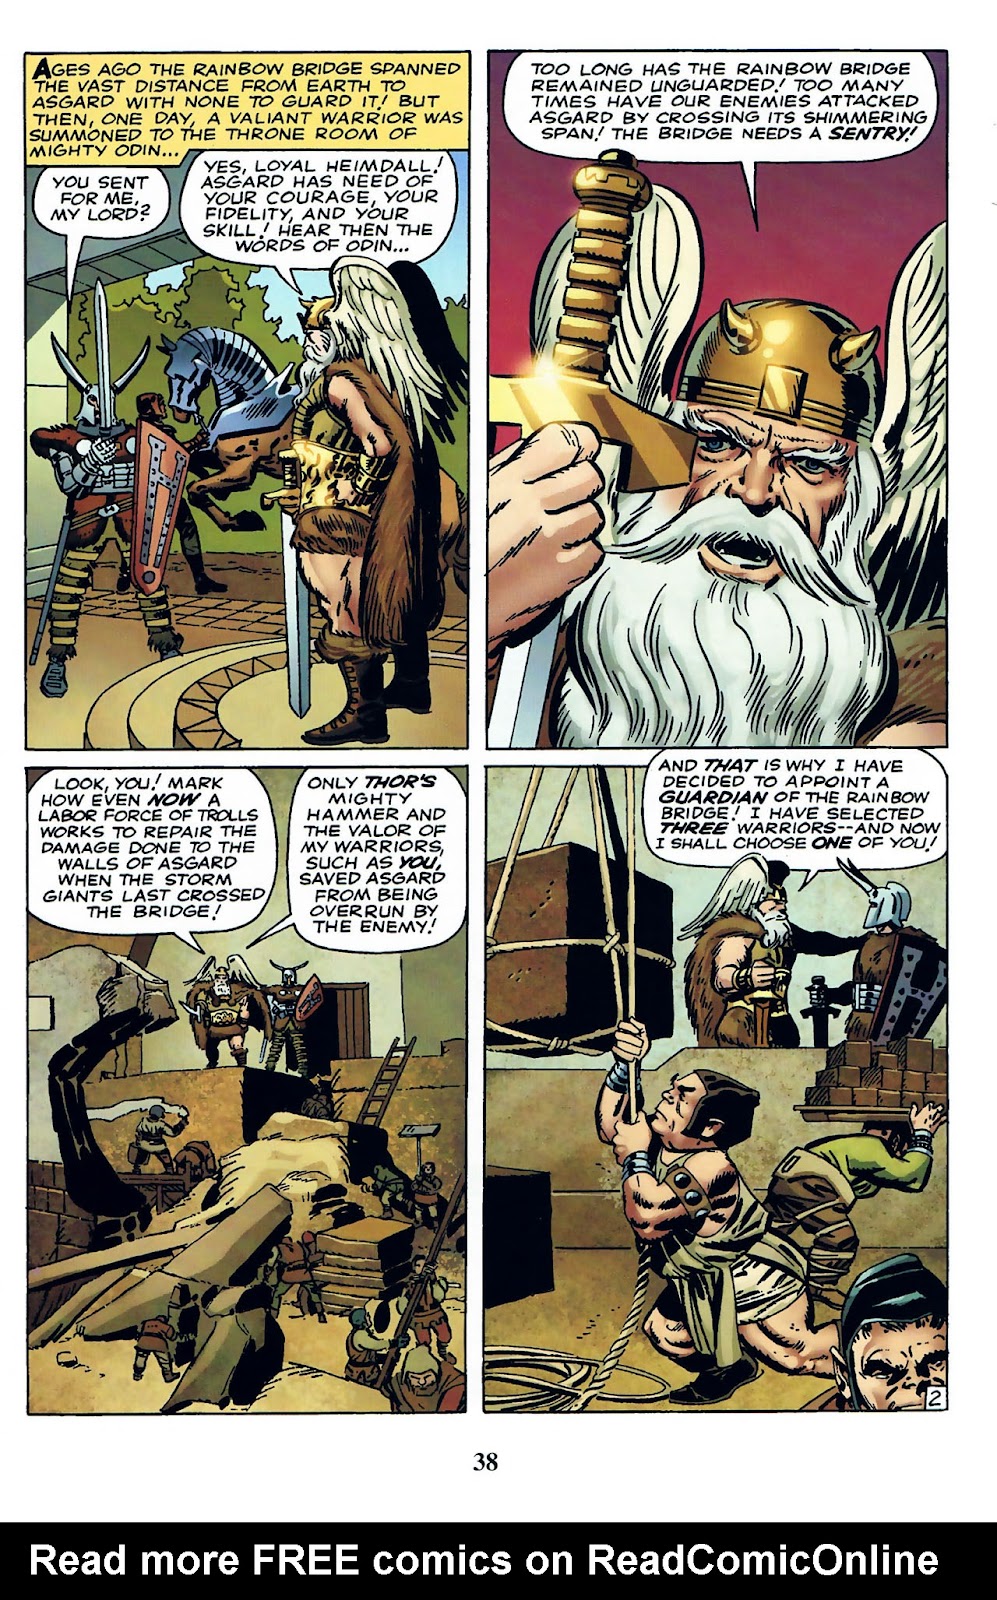 Thor: Tales of Asgard by Stan Lee & Jack Kirby issue 1 - Page 40